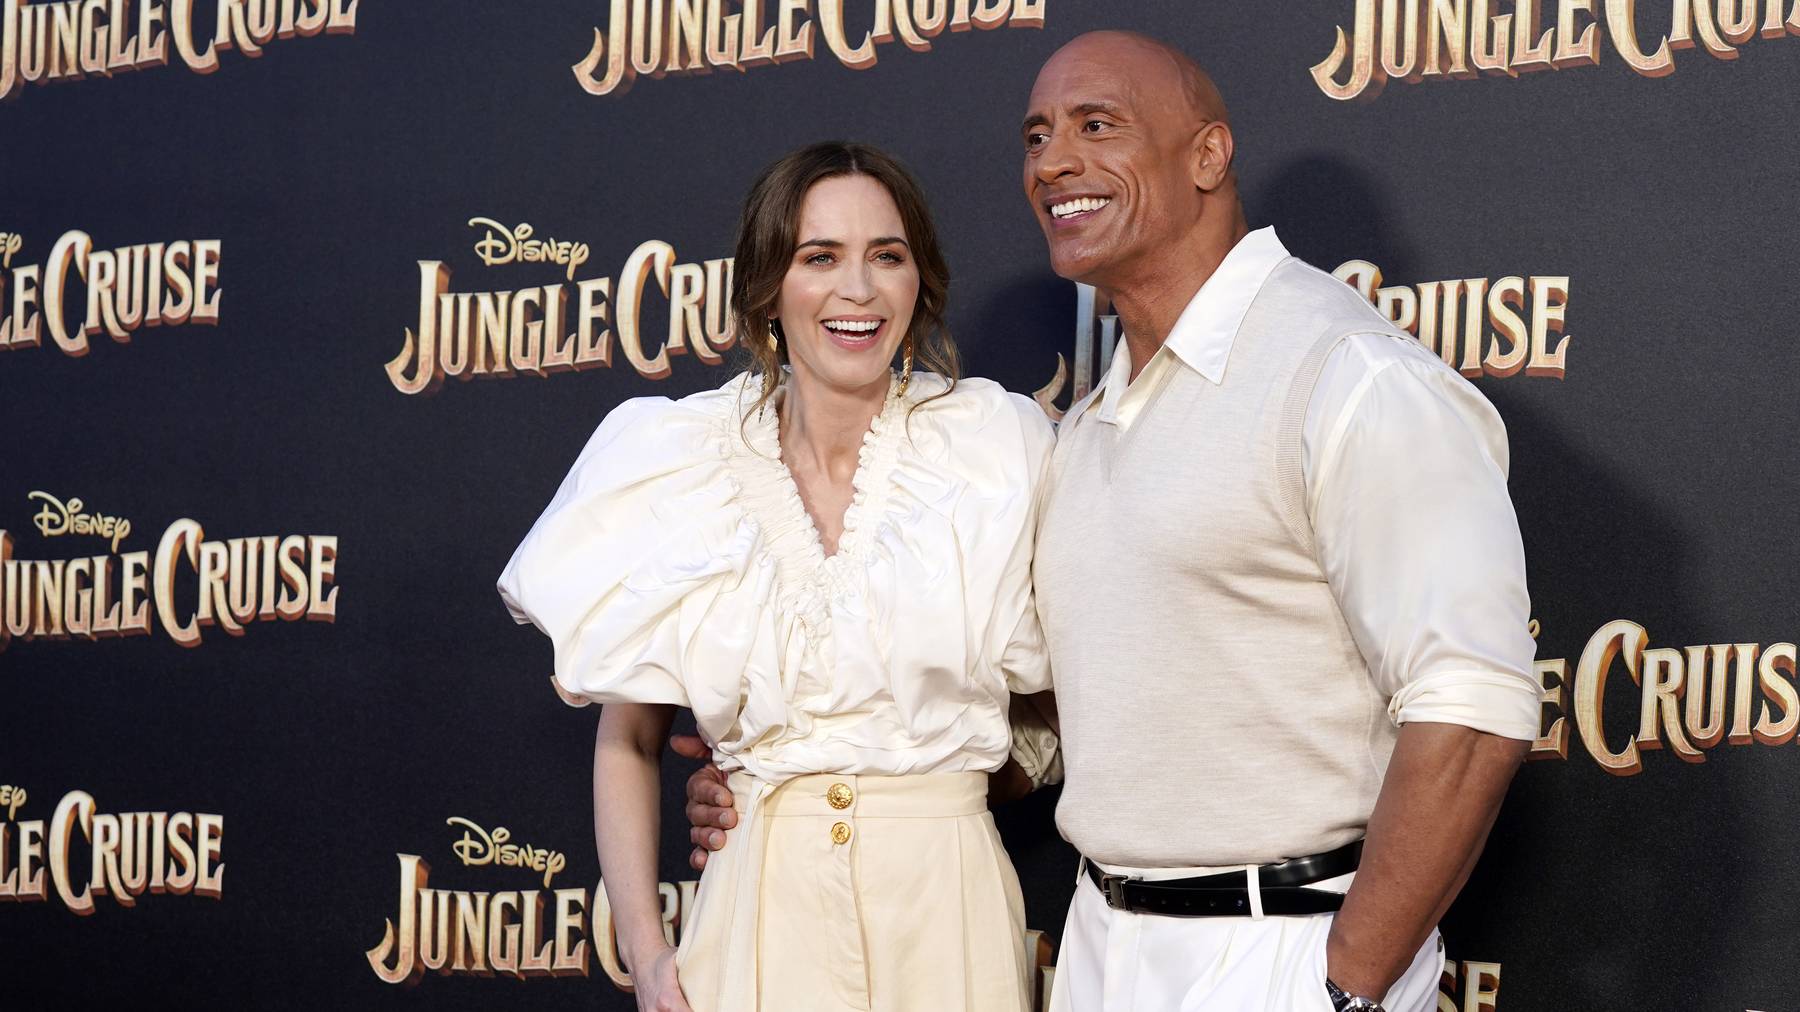 Emily Blunt, left, and Dwayne Johnson, cast members in «Jungle Cruise,» pose together at the world premiere of the film, Saturday, July 24, 2021, at Disneyland in Anaheim, Calif.